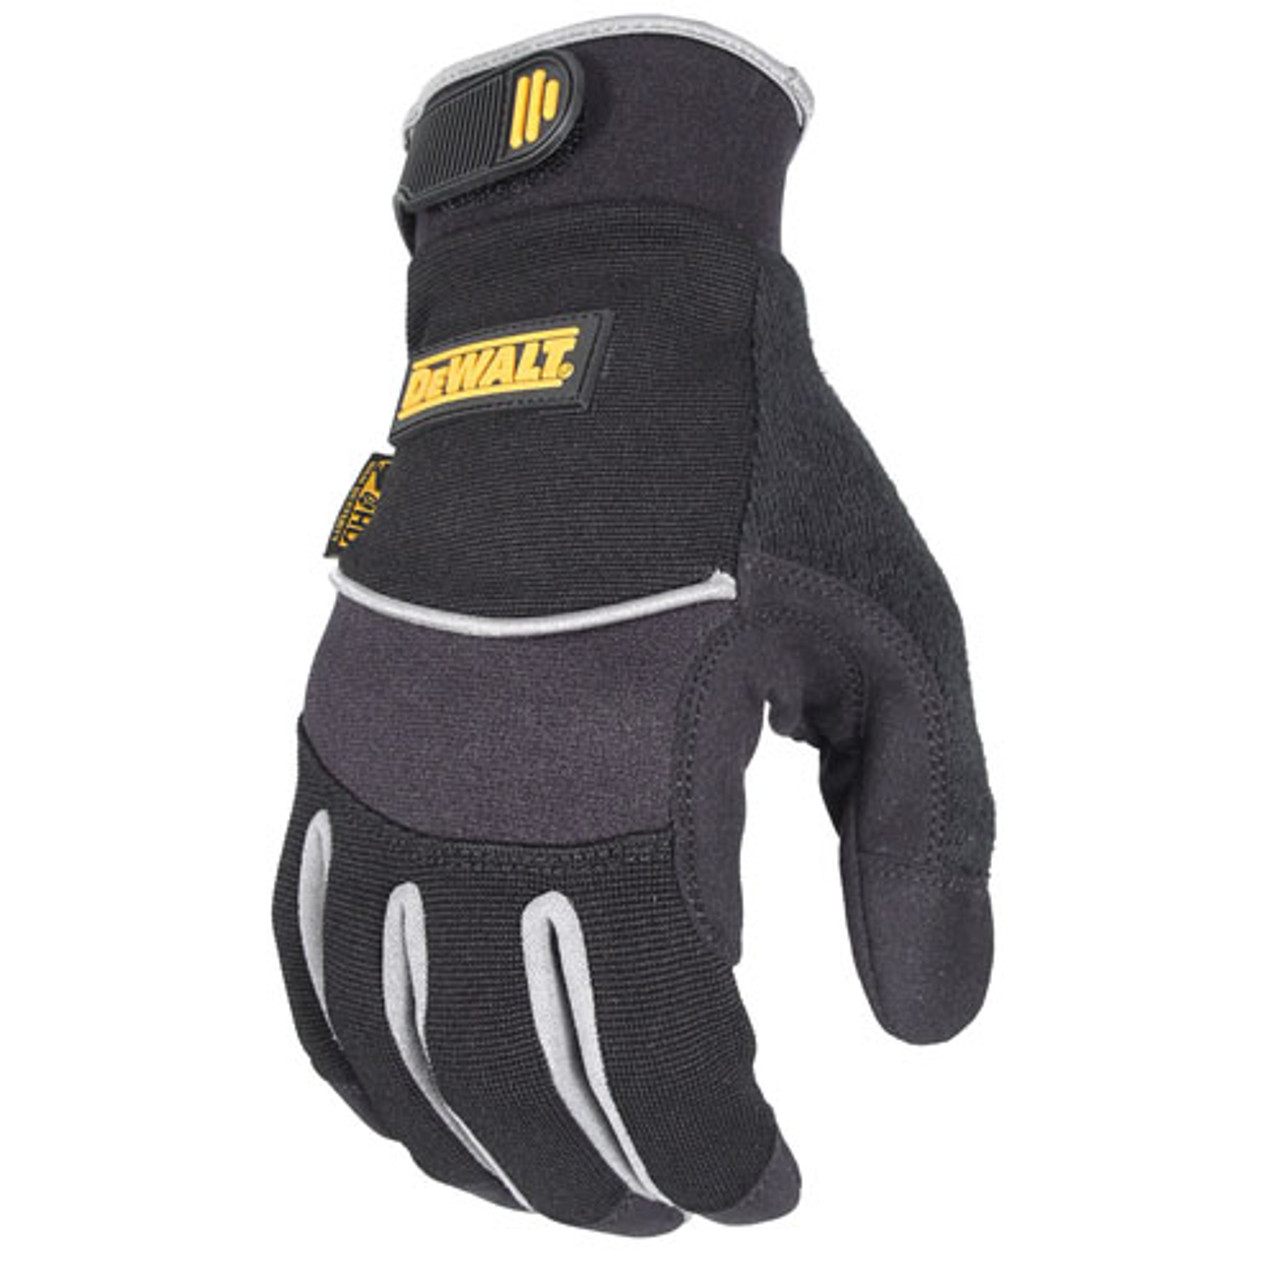 Ironclad General Utility Work Gloves GUG, All-Purpose, Performance Fit,  Durable, Machine Washable, (1 Pair) Black